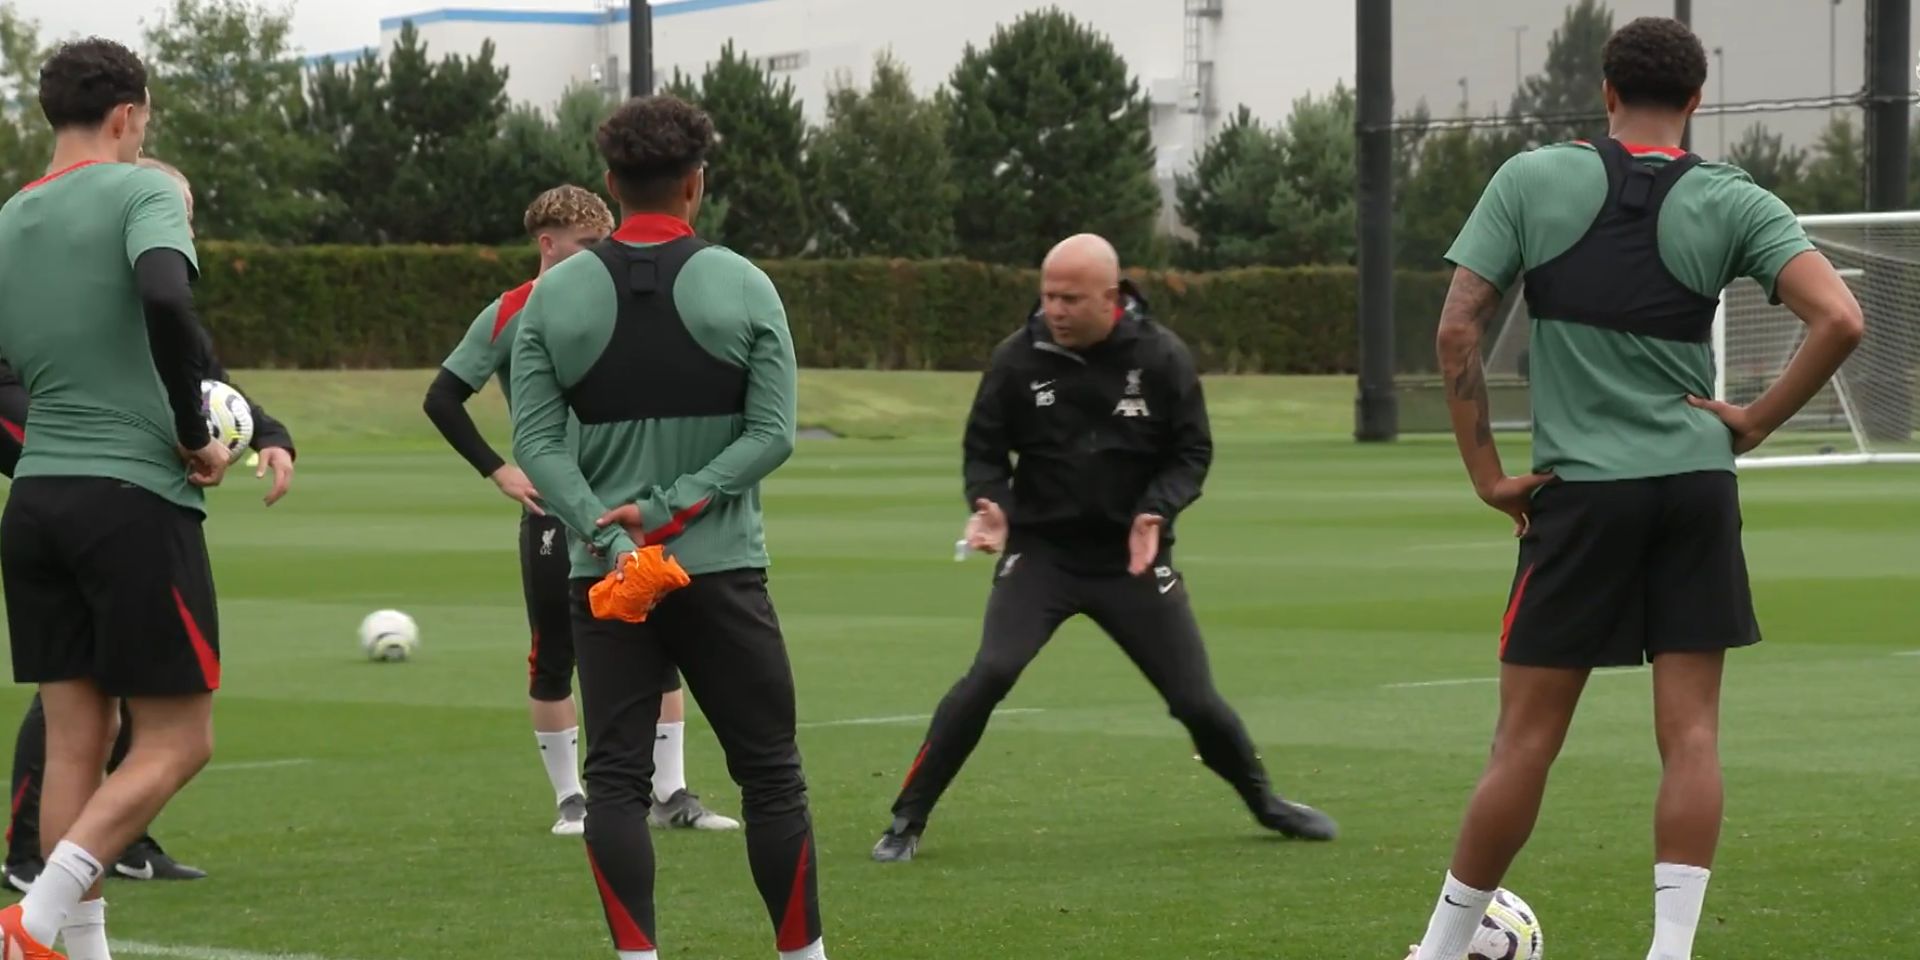 (Video) Slot spotted doing one thing in training we rarely saw from Klopp